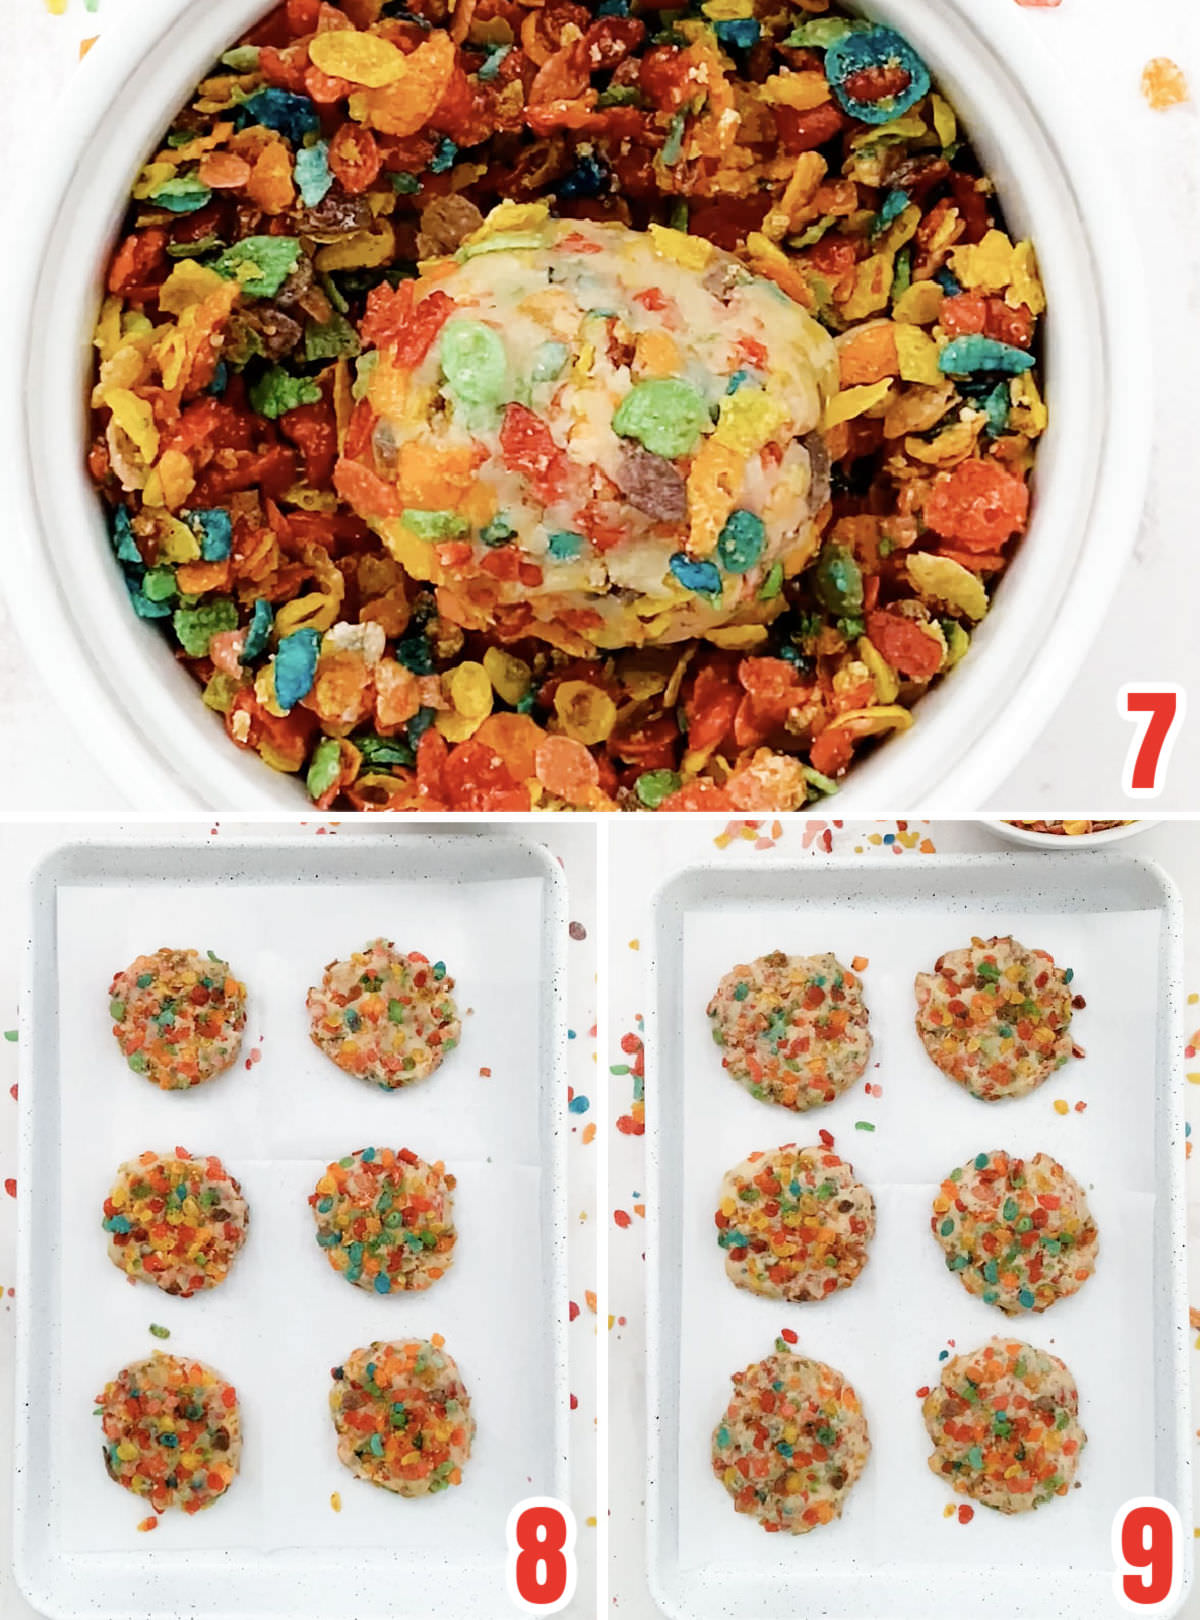 Collage image showing the Fruity Pebbles cookies before they go in the oven and after they come out of the oven.